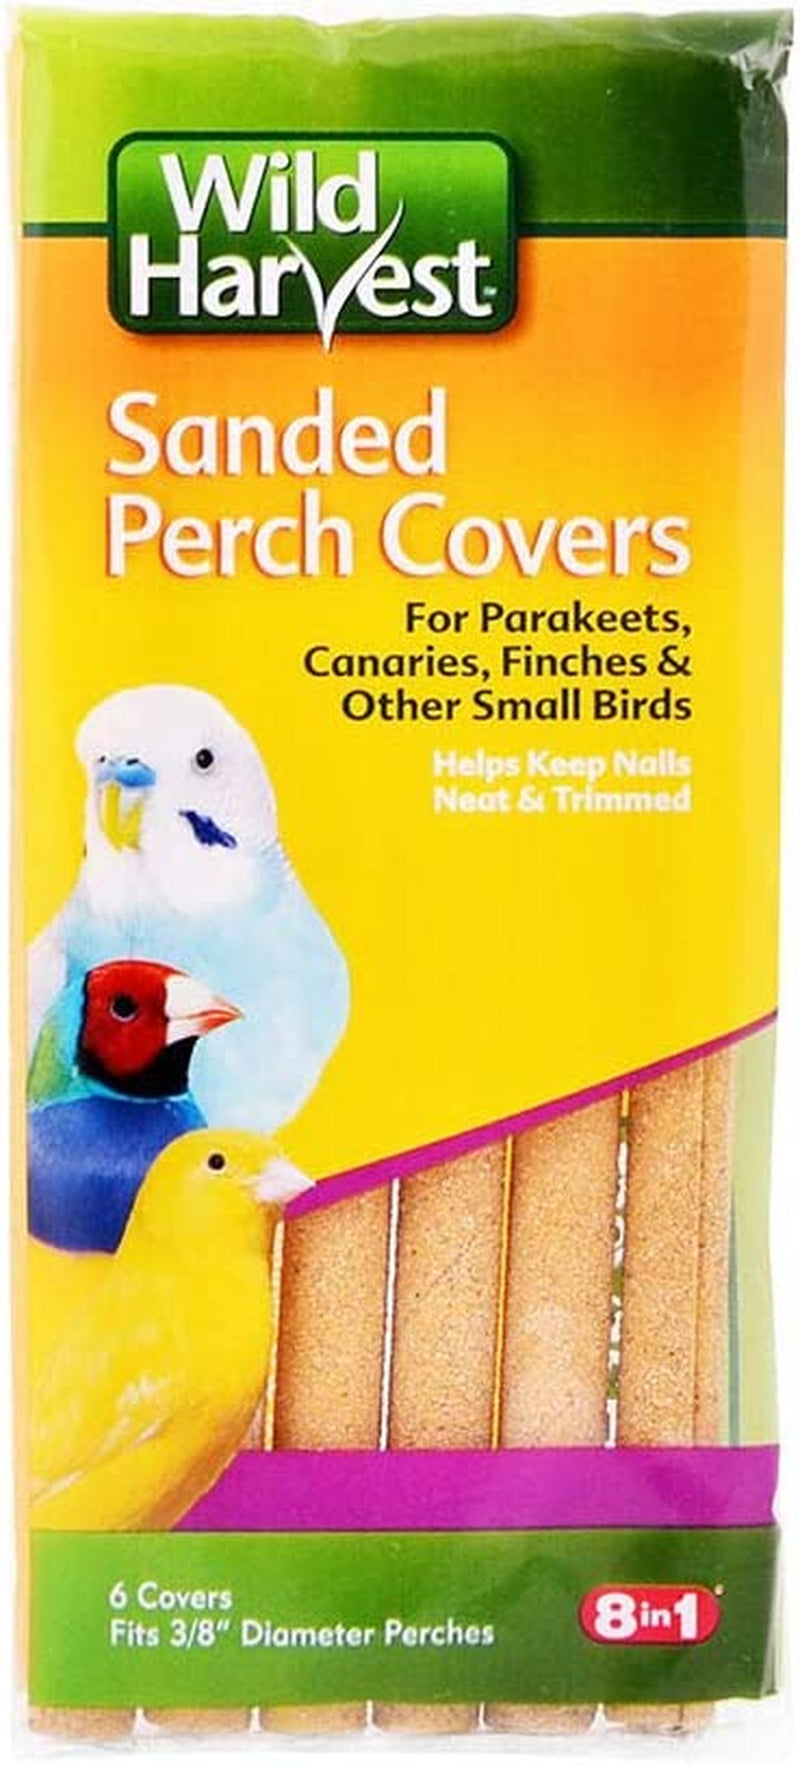 Wild Harvest SANDED PERCH COVERS for PARAKEETS CANARIES FINCHES & SMALL BIRDS